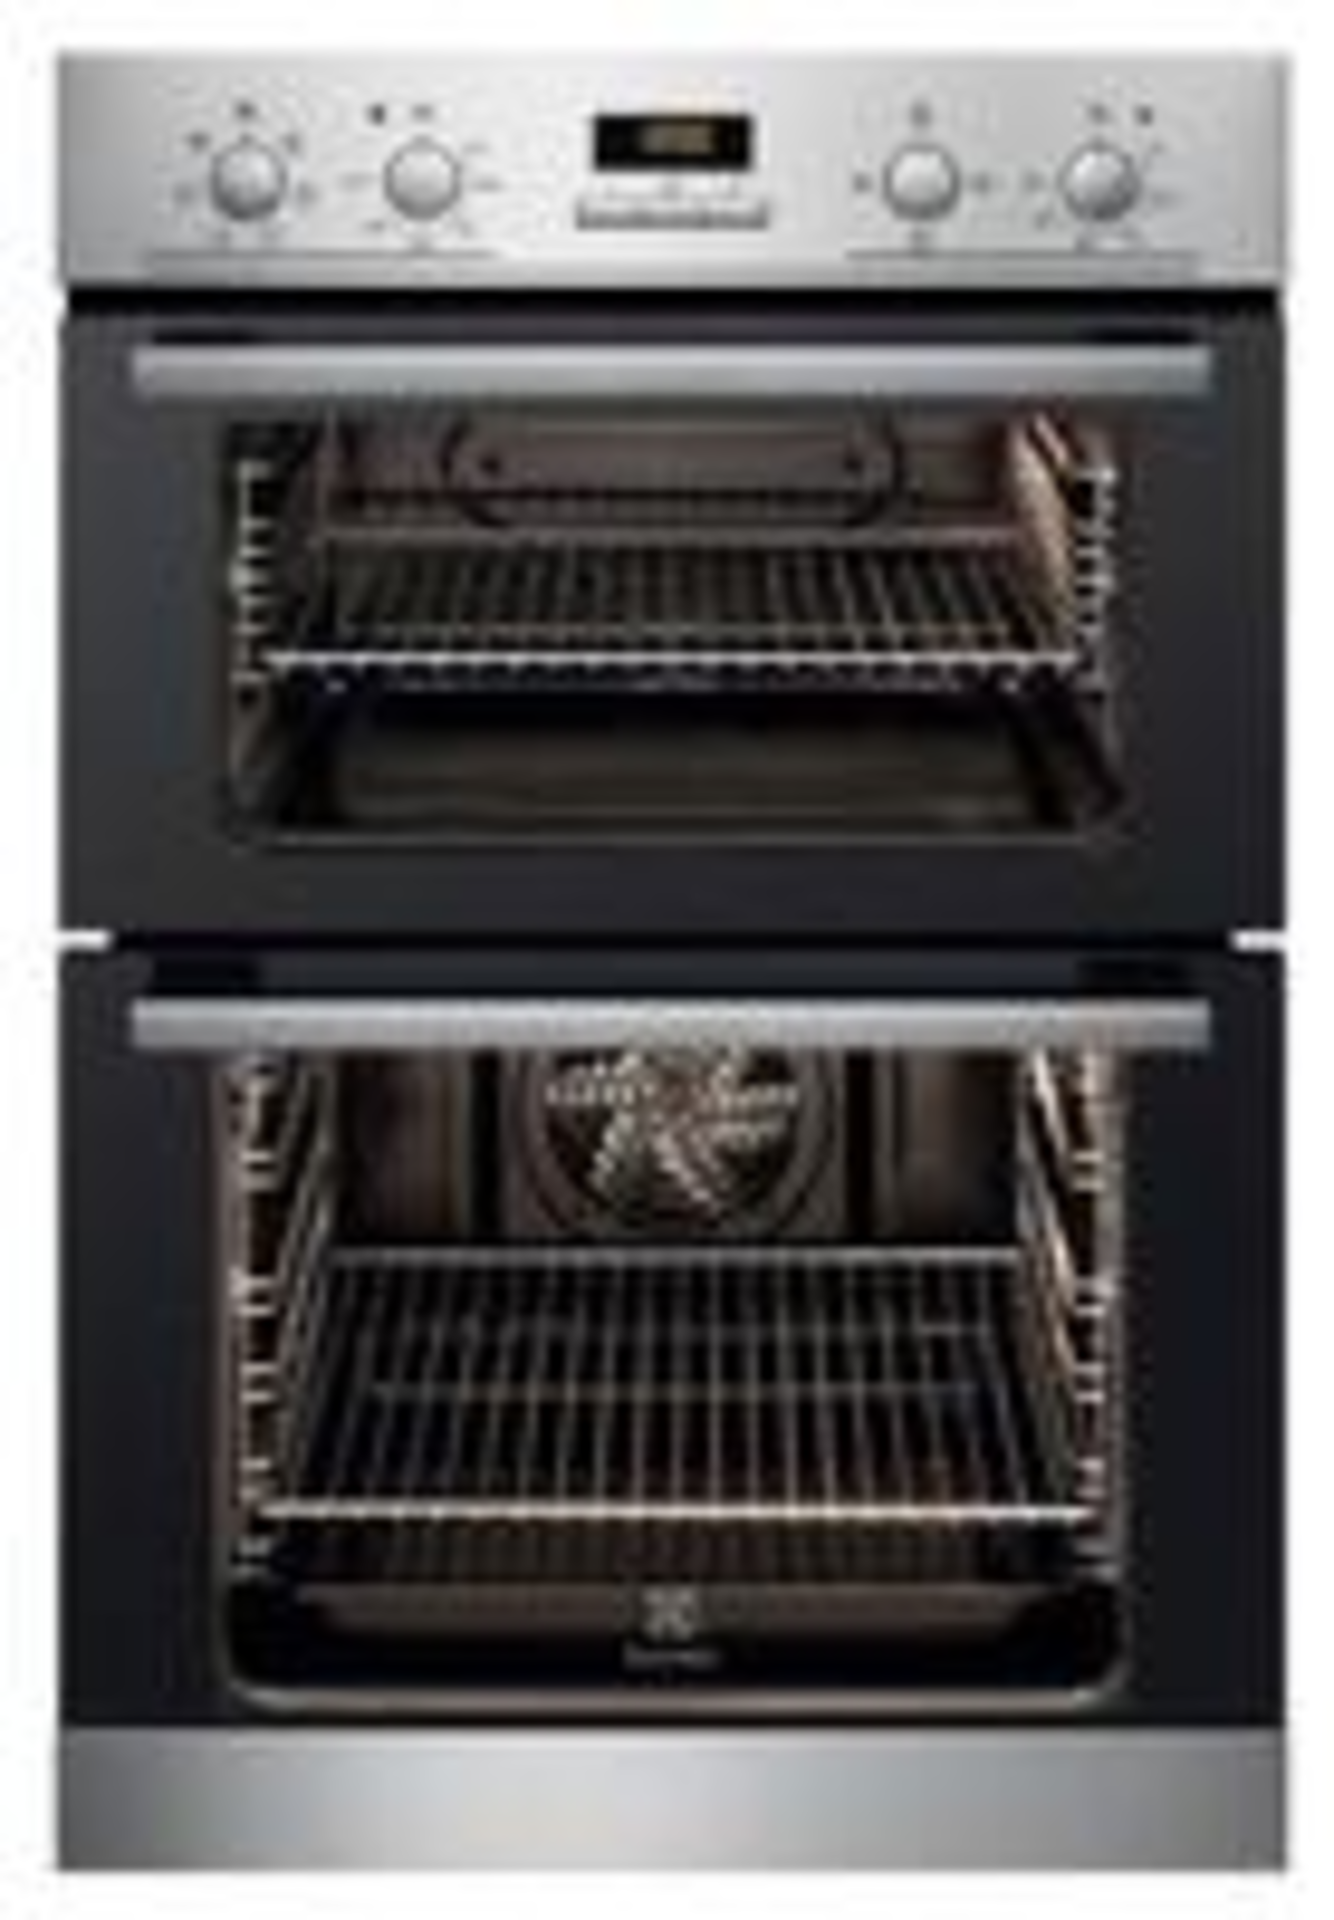 1: ELECTROLUX E0D346AAX Built In Double Oven